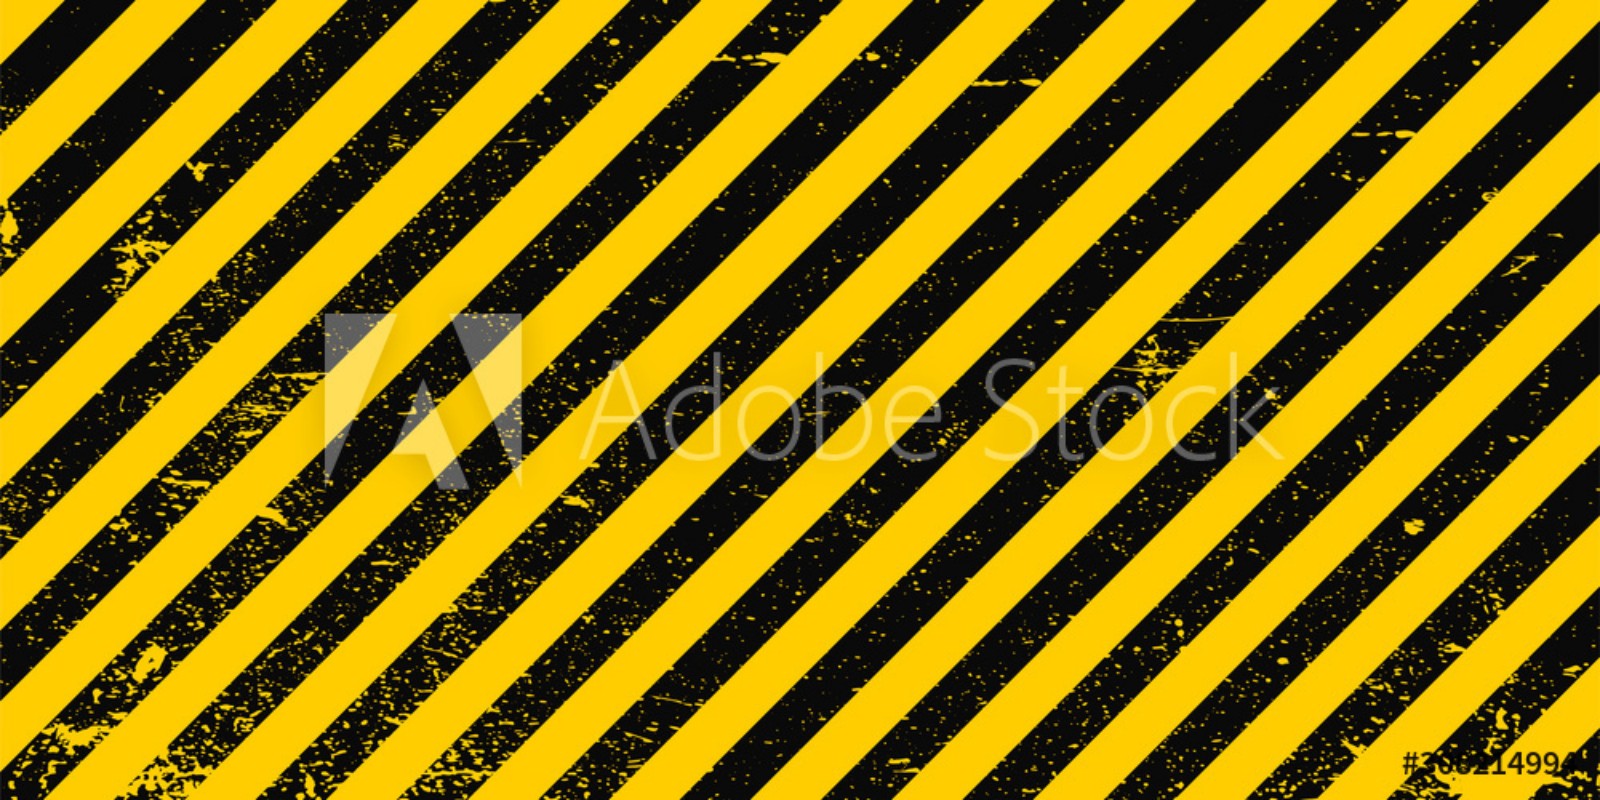 Picture of Industrial background warning frame grunge yellow black diagonal stripes vector grunge texture warn caution construction safety background